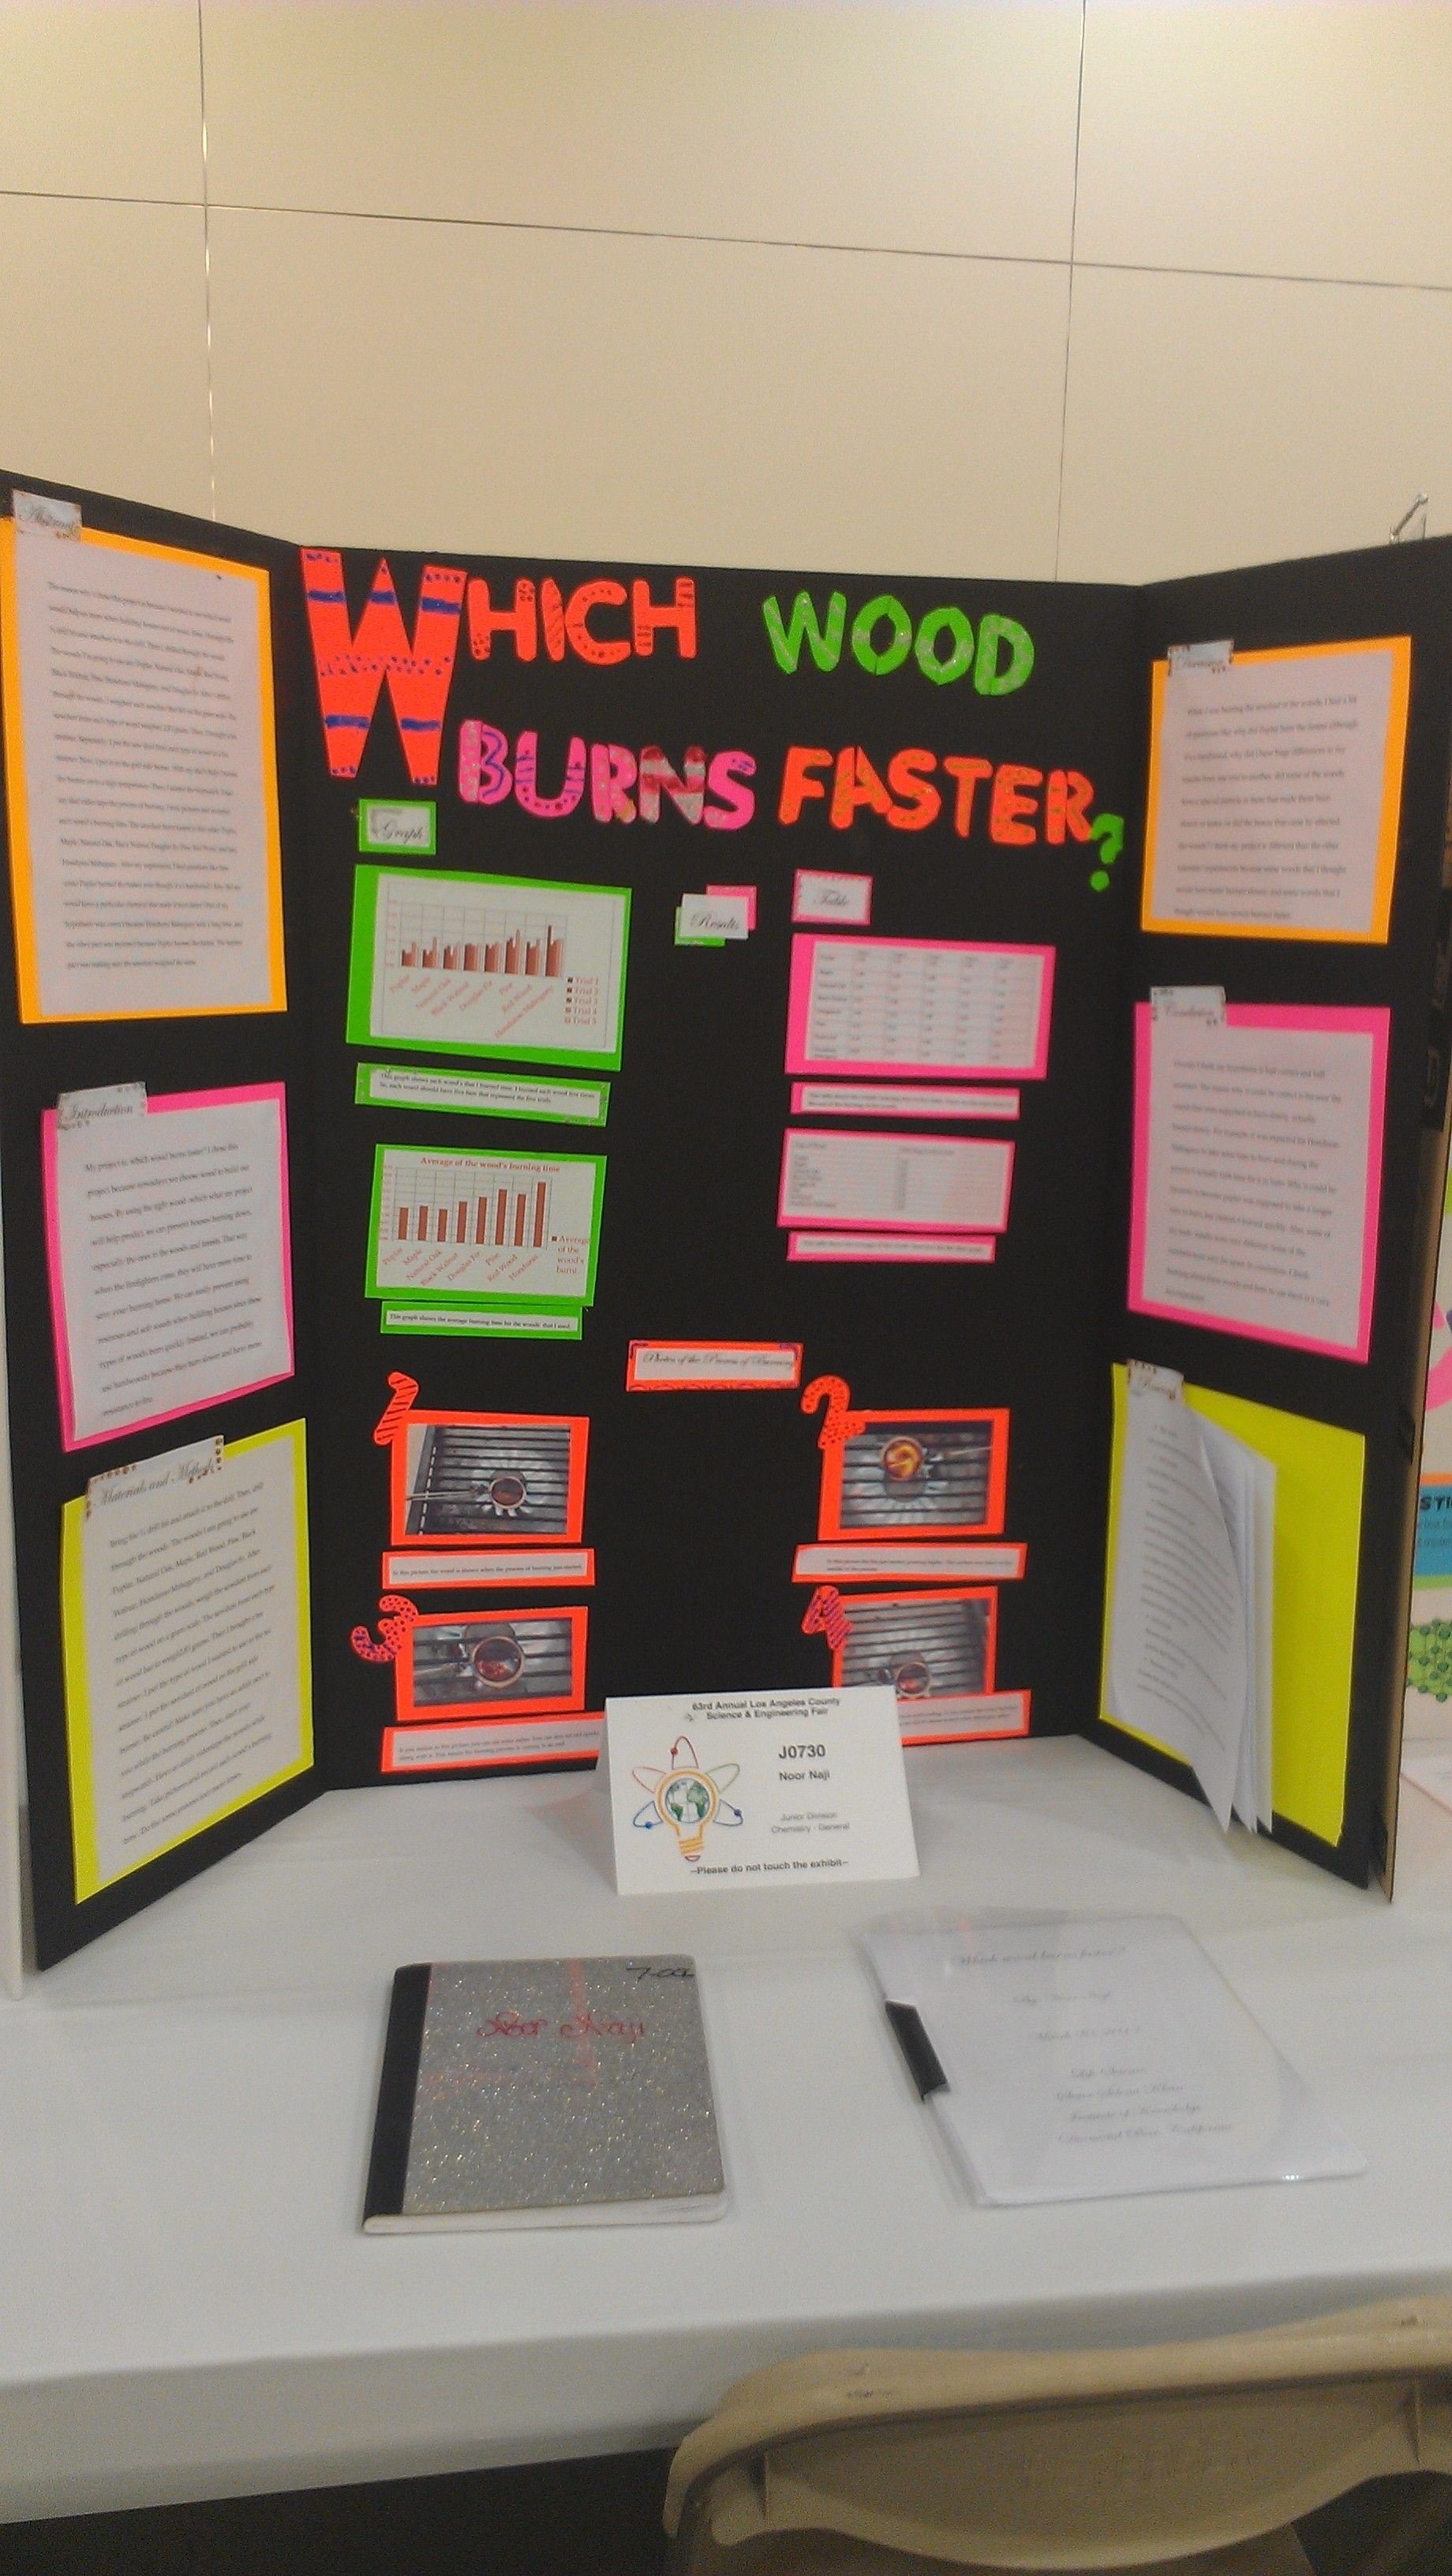 10 Most Recommended Science Project Ideas For 7Th Graders 7th grade science fair projectnoor naji 2013 la county science 5 2022